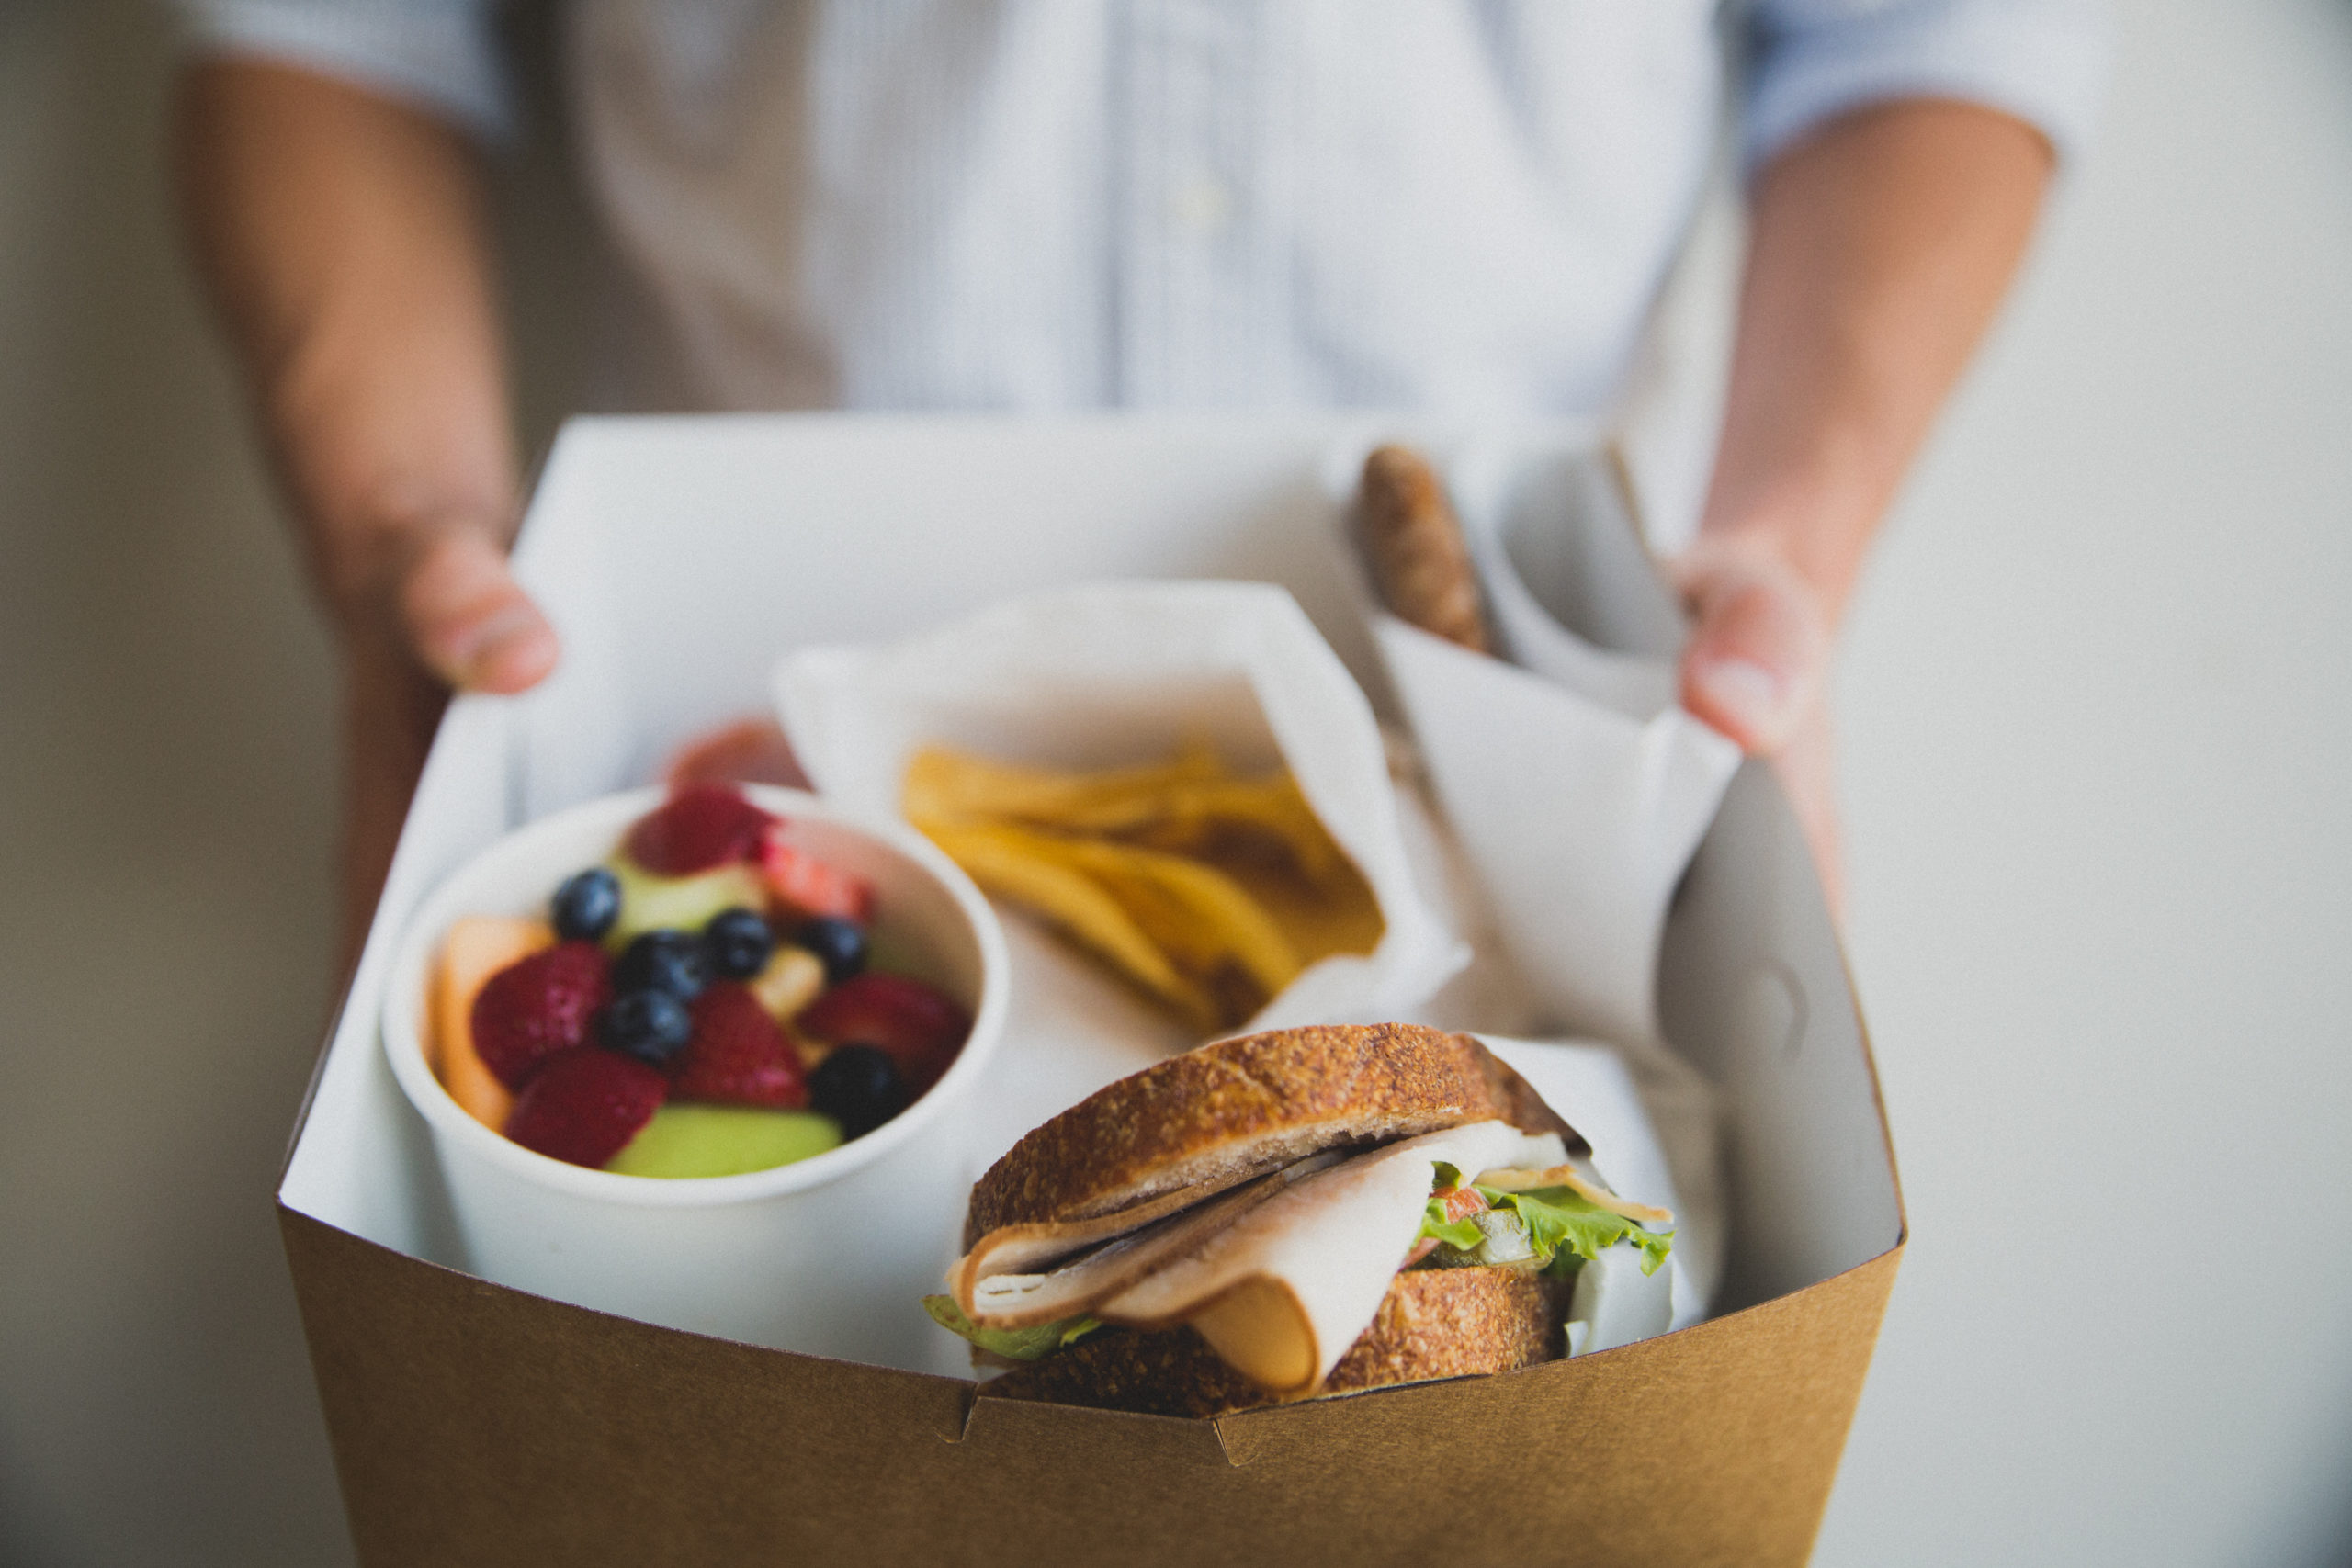 Someone holds out a boxed lunch with a sandwich, fresh fruit cup, and snack inside